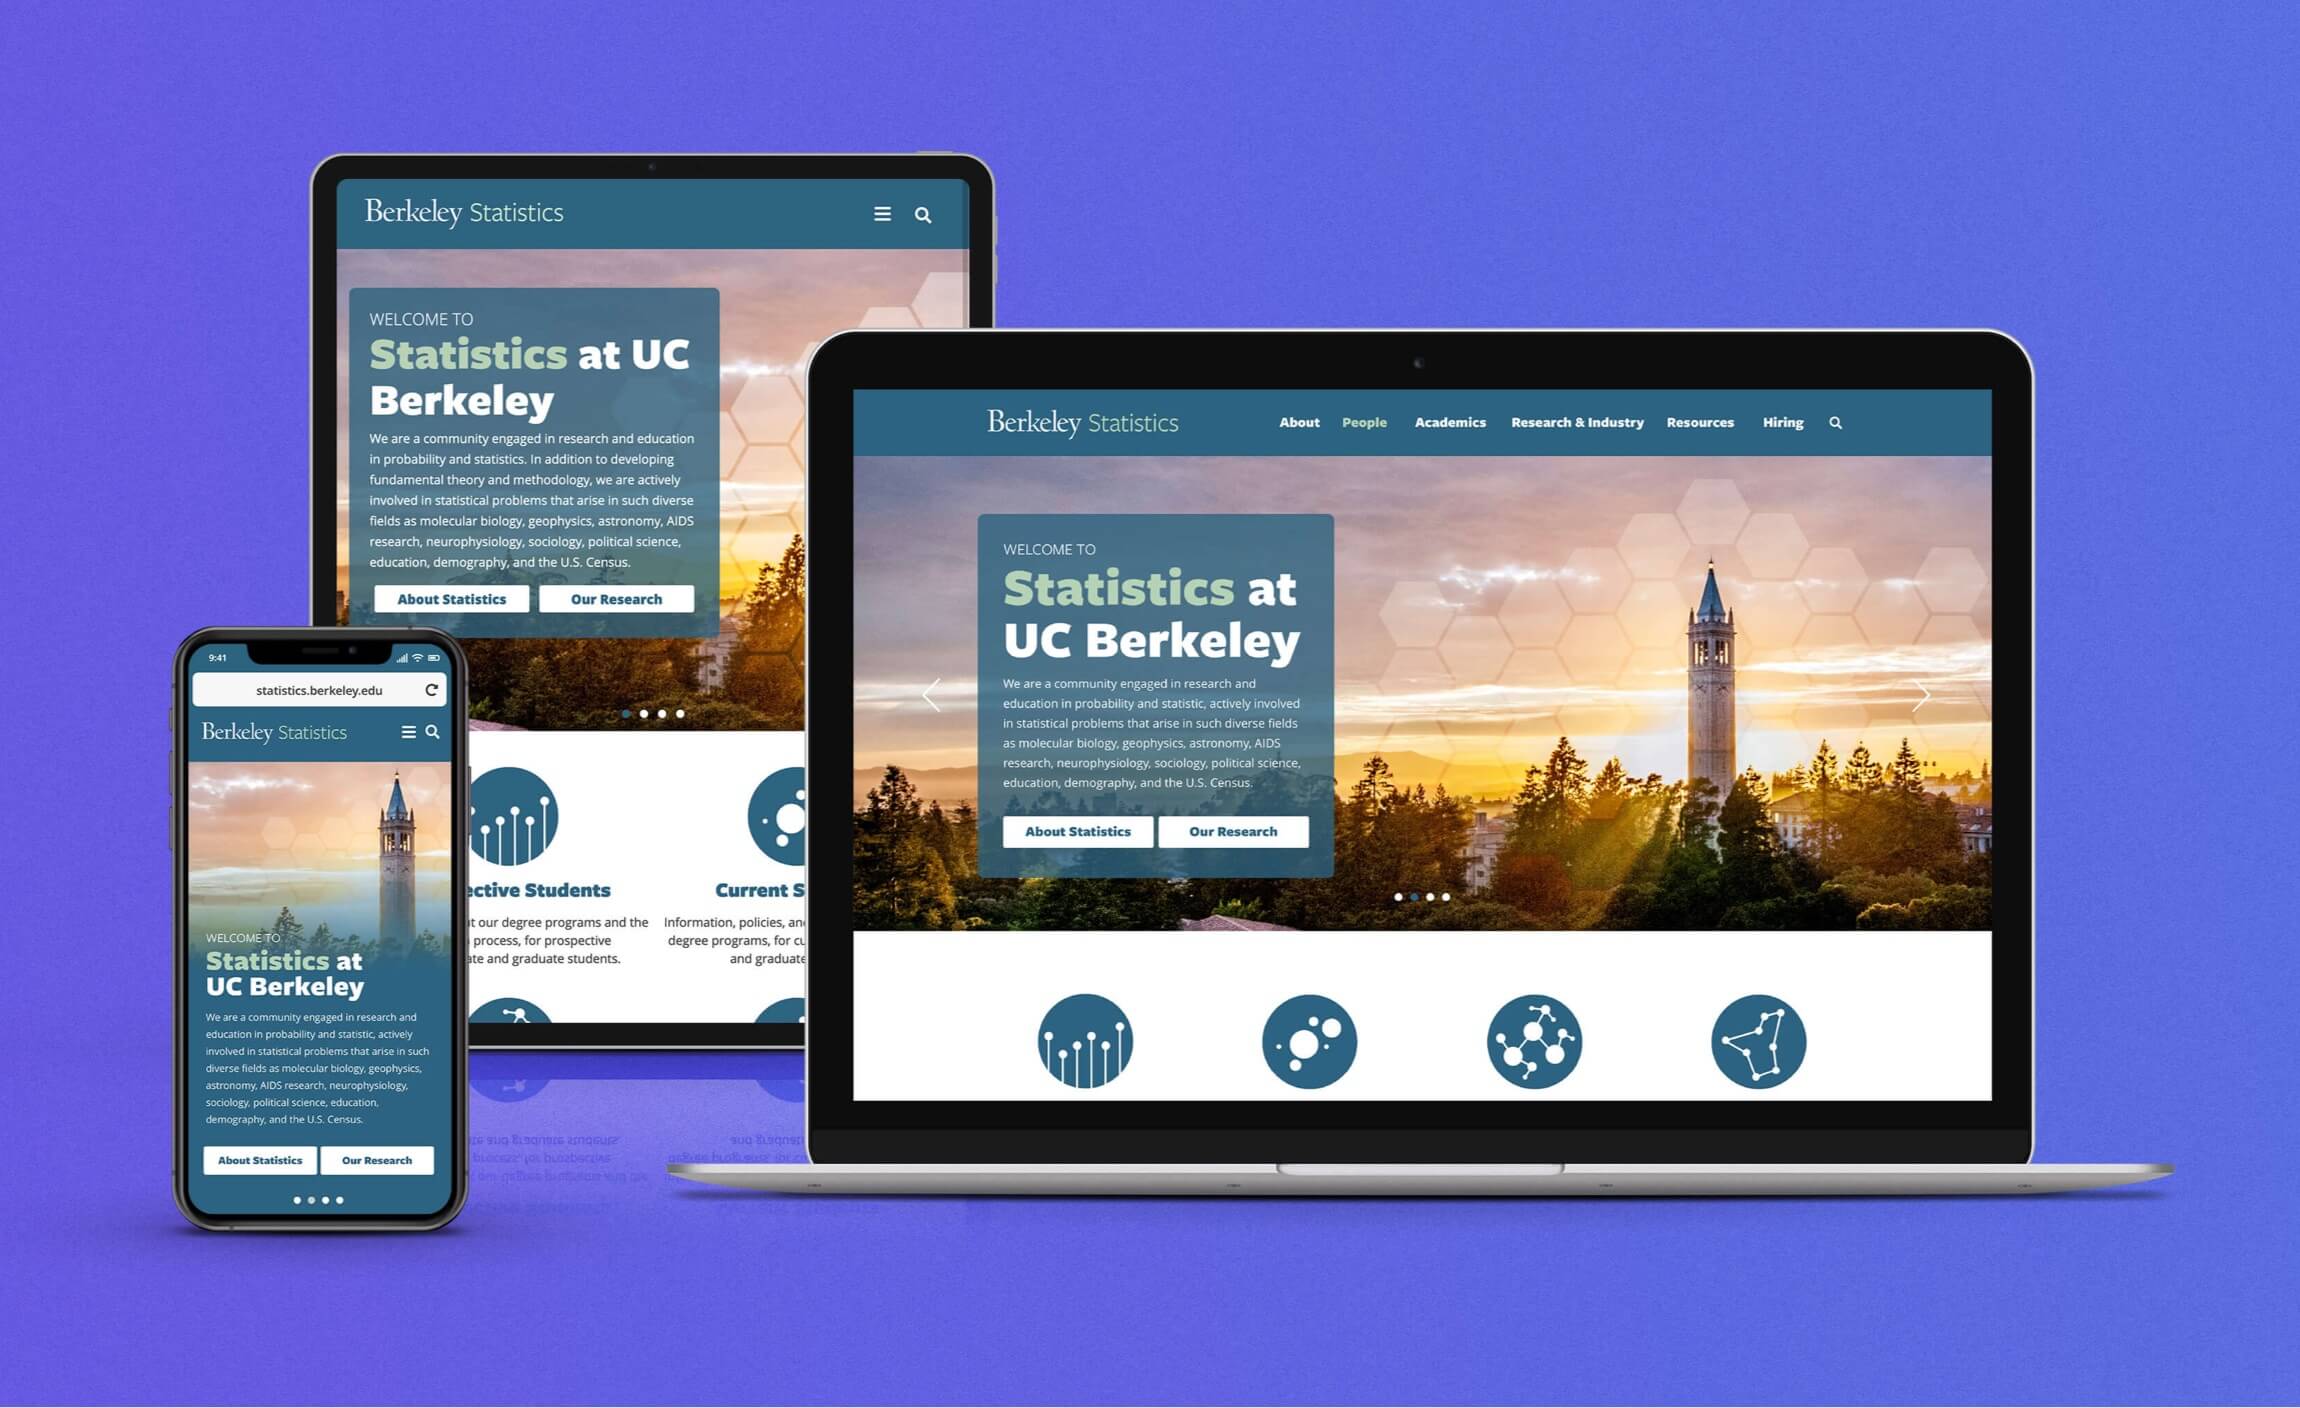 Homepage of the UC Berkeley Statistics website shown in a laptop, tablet, and smartphone